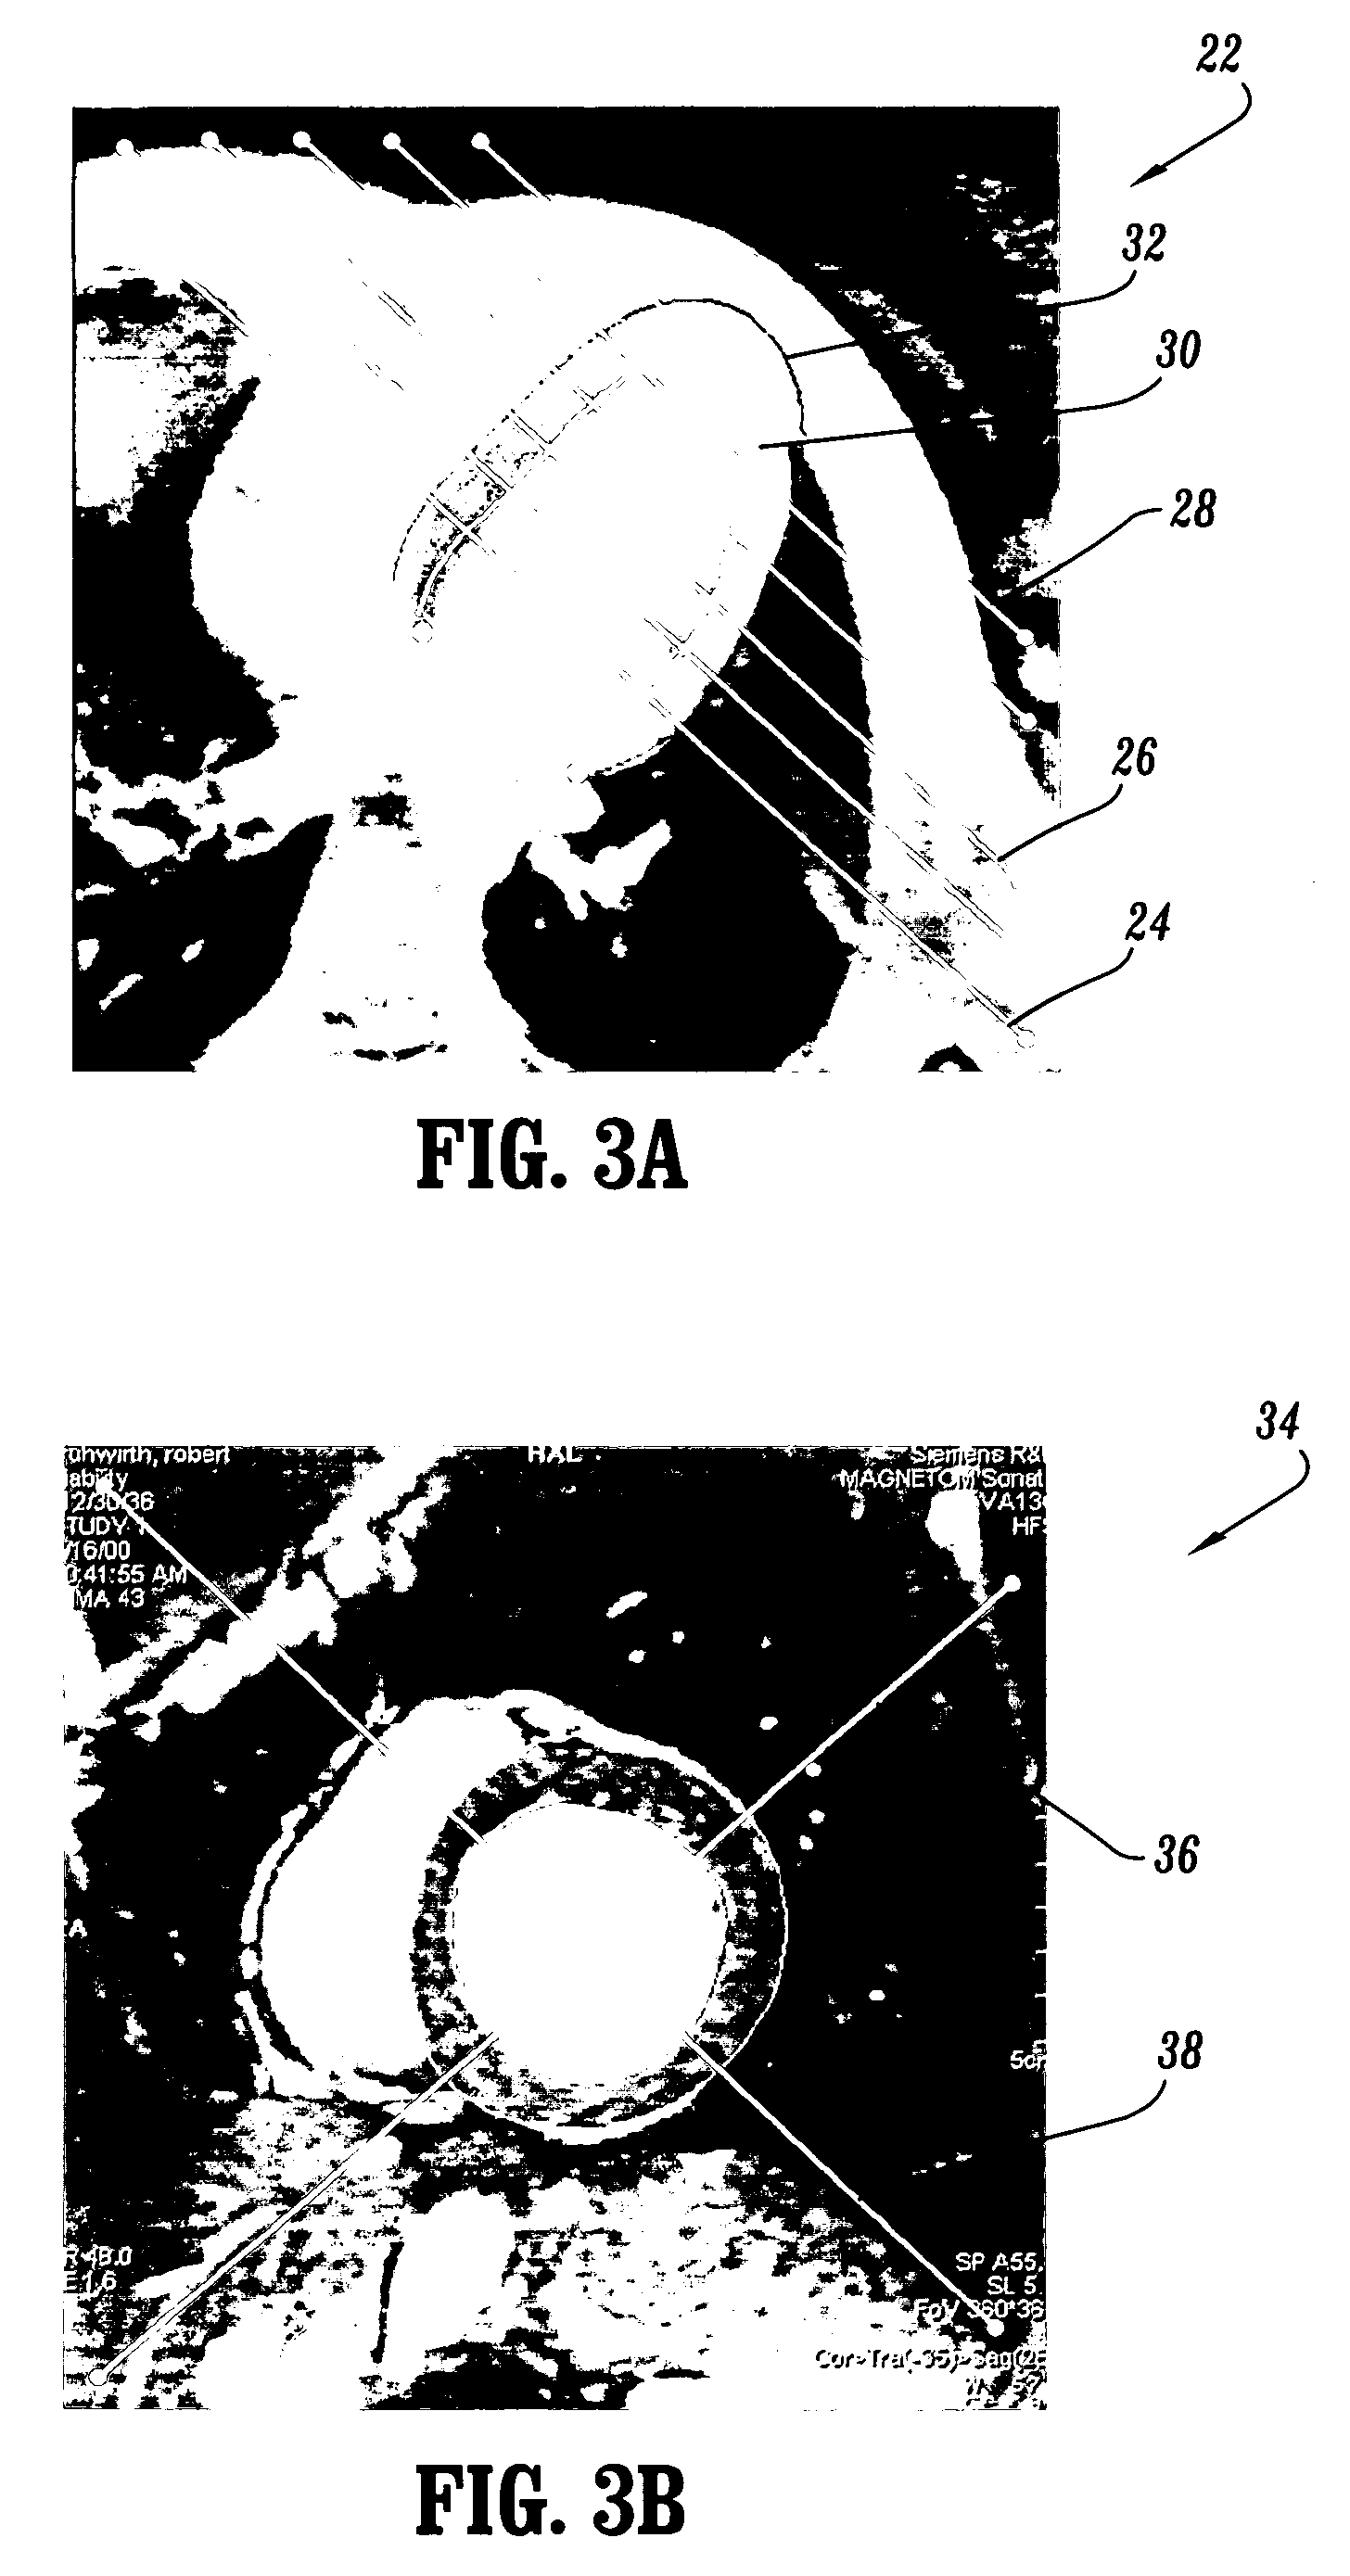 System and method for spatio-temporal guidepoint modeling